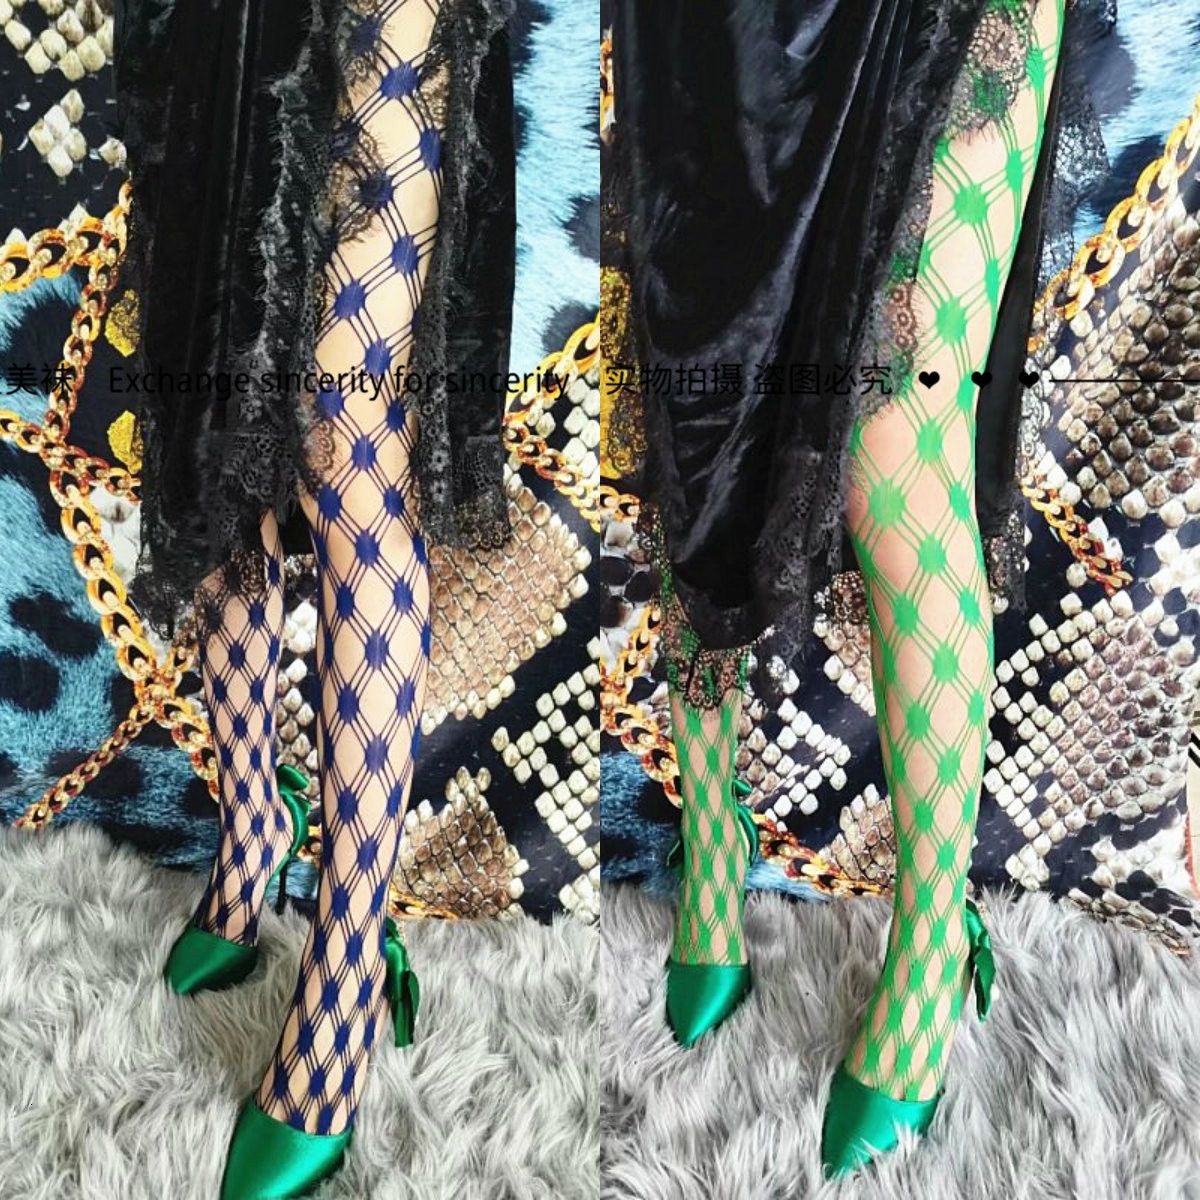 Original Color Irregular Square Hollowed Out Mesh Stockings Plus Size  Tights Printed Tights Spider Stockings Lingerie Fishnet